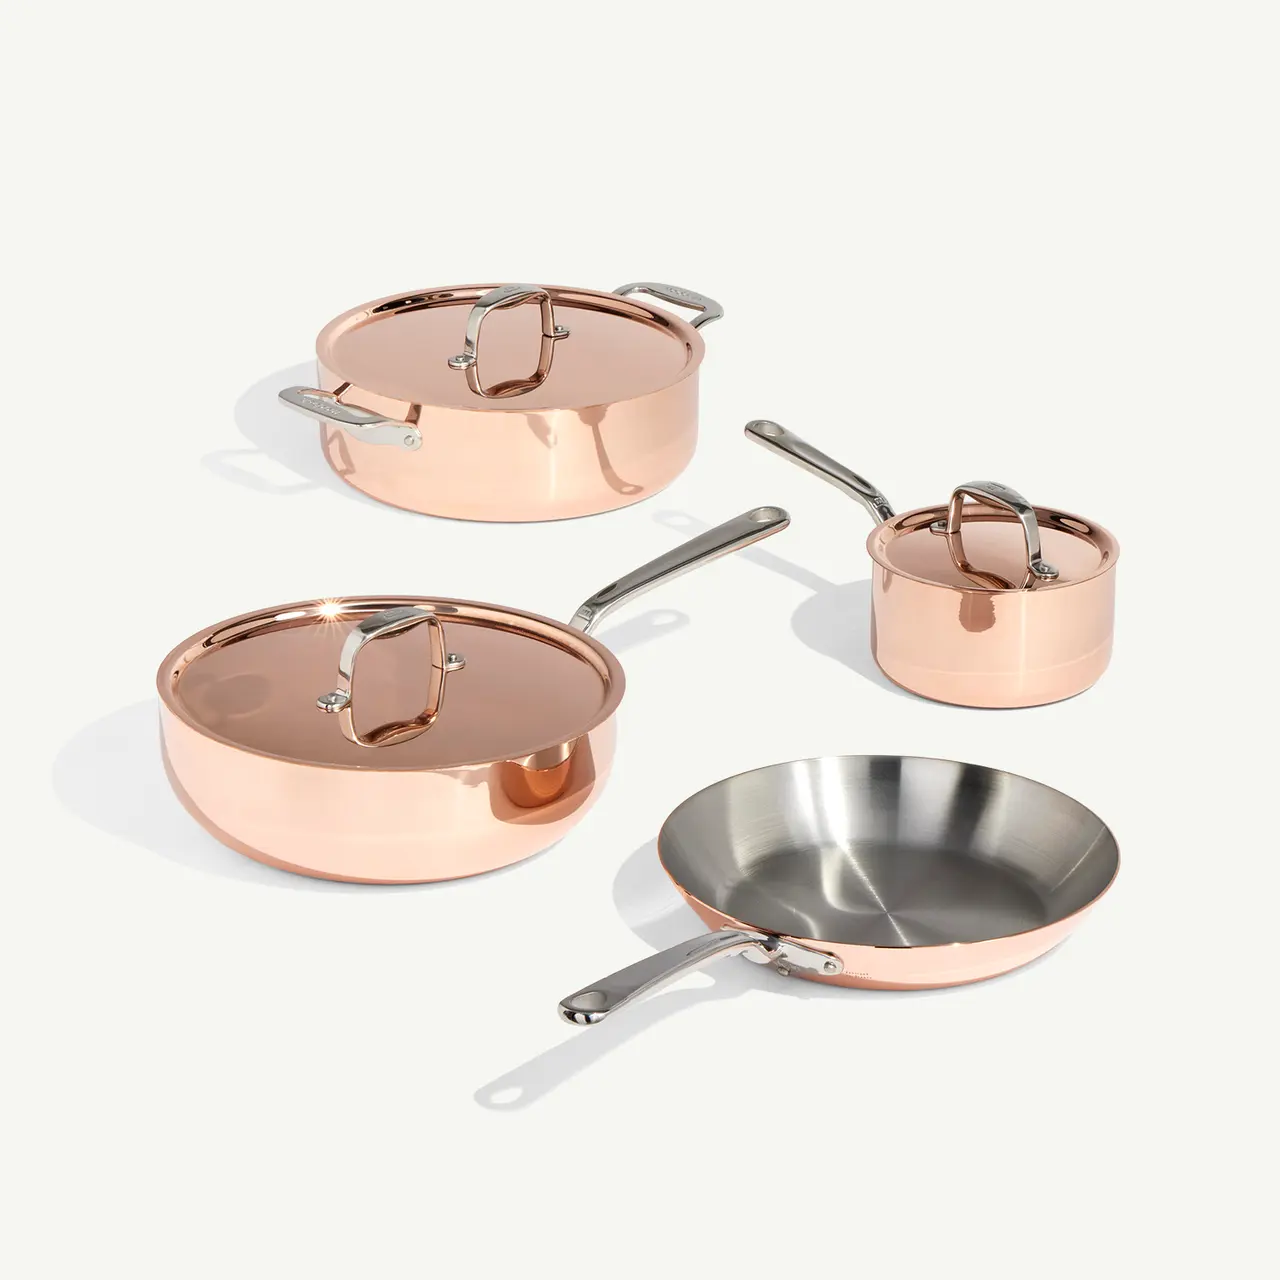 A set of copper cookware, including two pots with lids, a pan, and a saucepan, is neatly arranged on a light background.